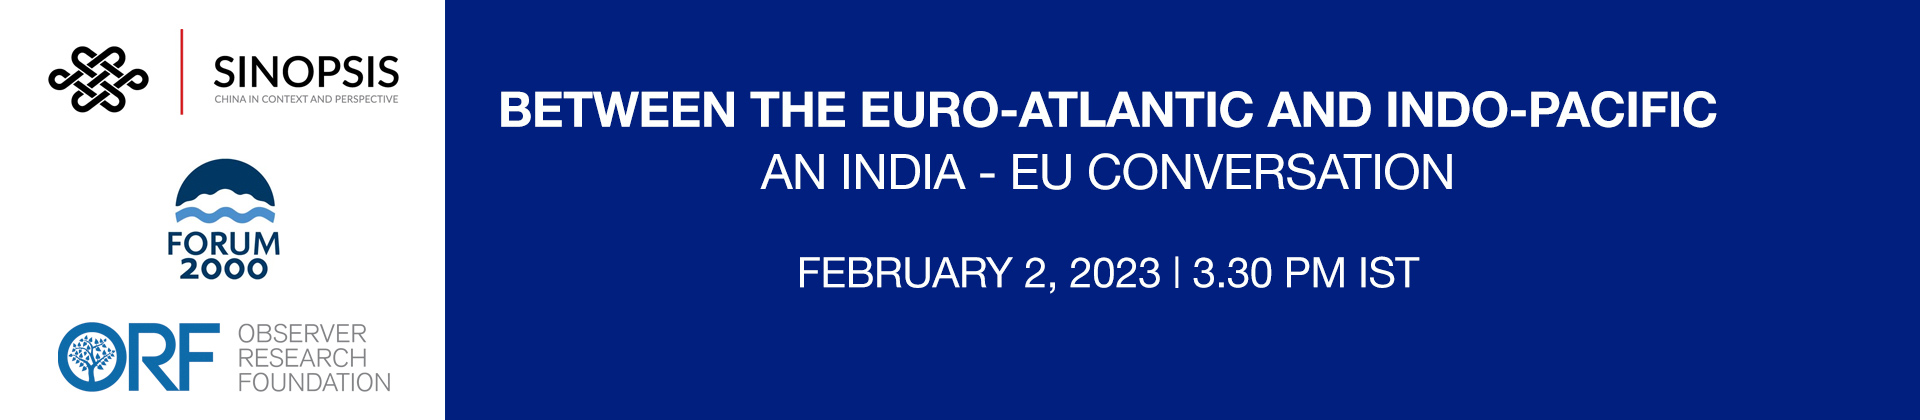 Between the Euro-Atlantic and Indo-Pacific: An India - EU Conversation